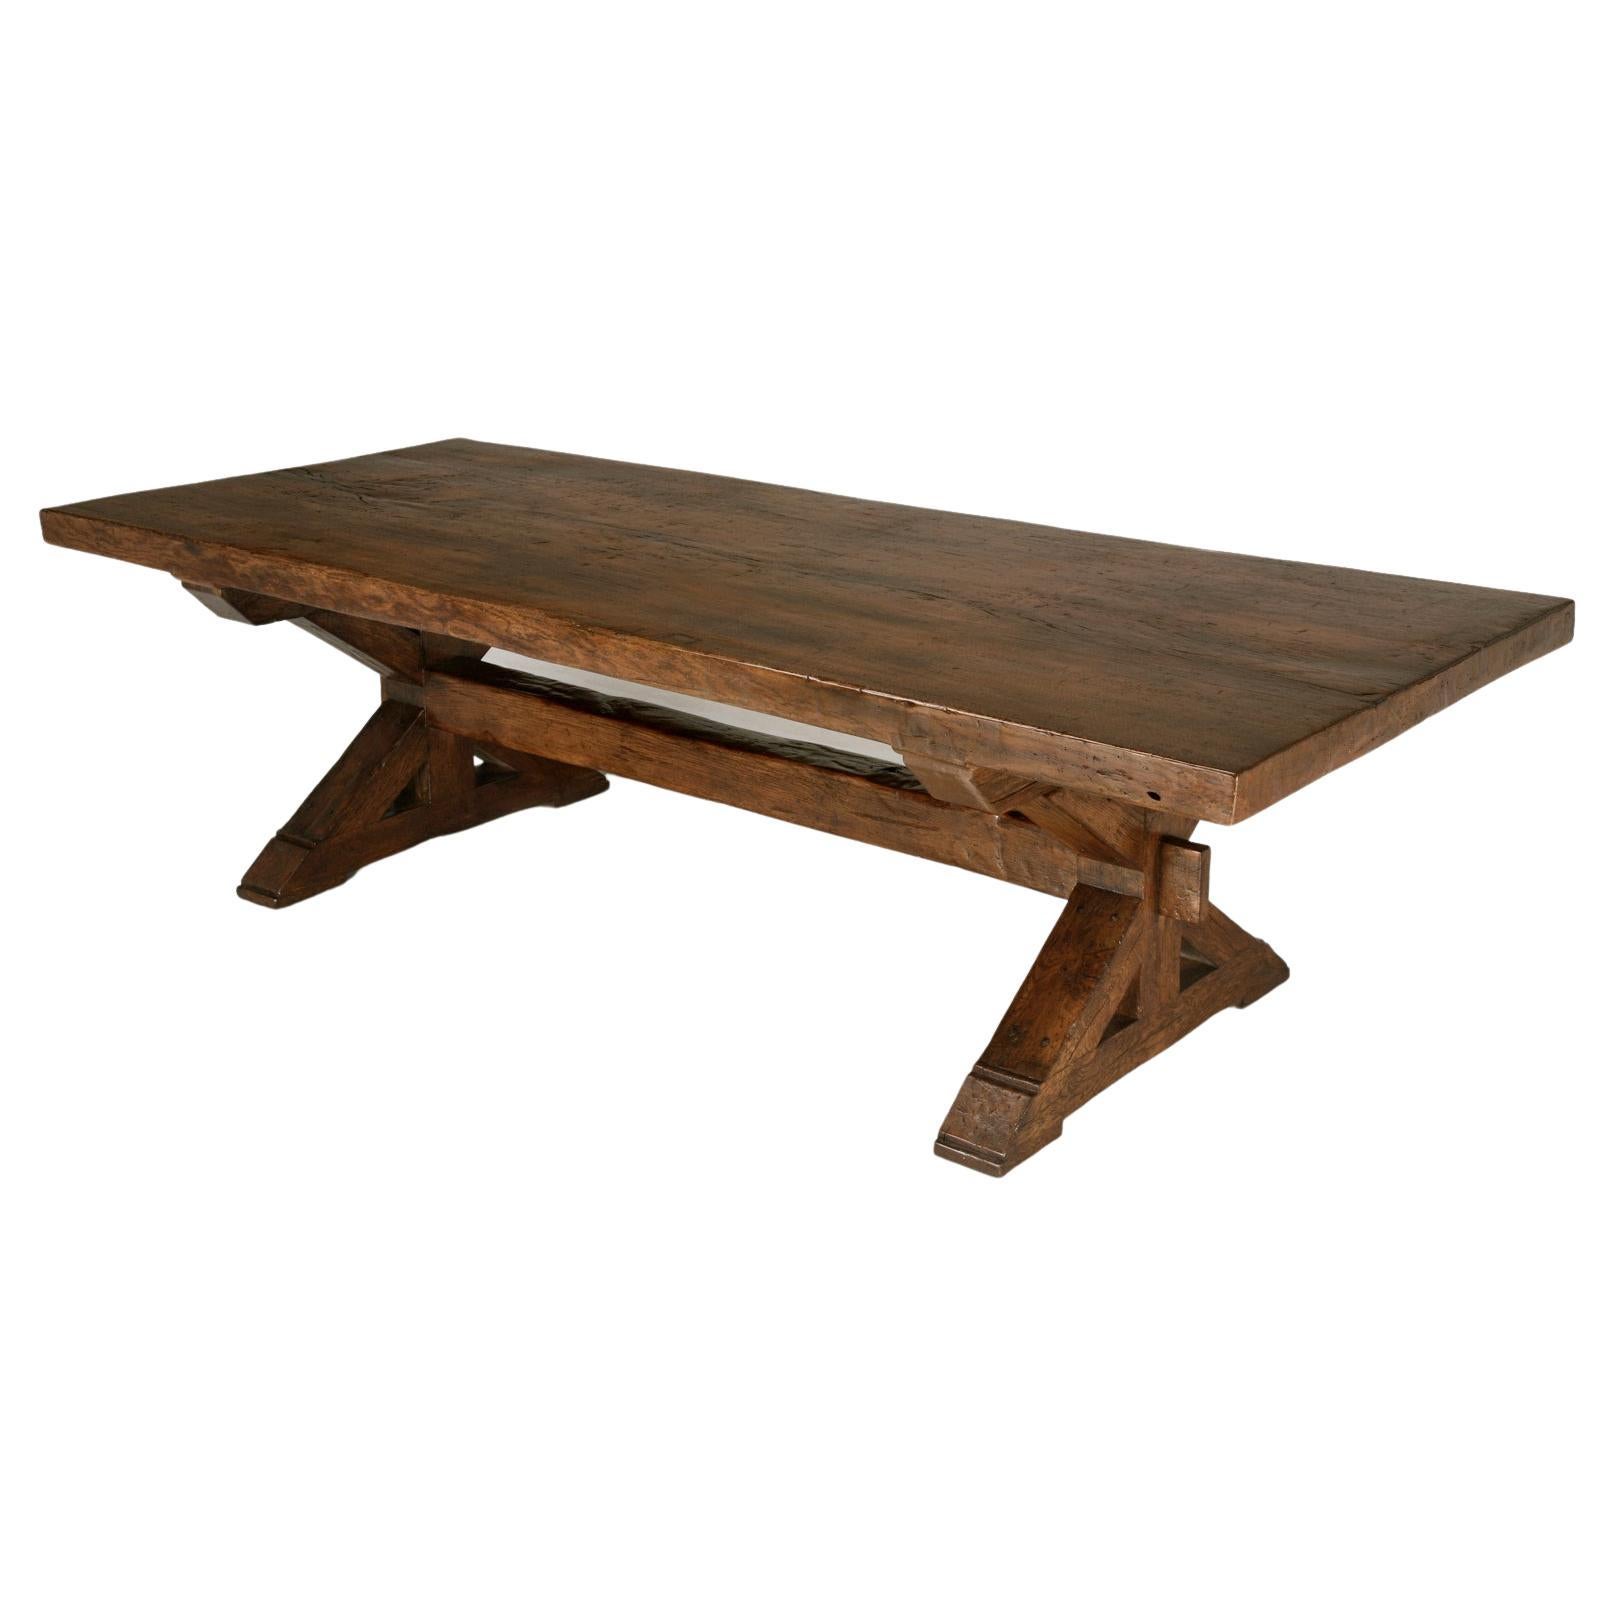 French Inspired Farm Table Made in Chicago Antique White Oak Heavily Distressed  For Sale